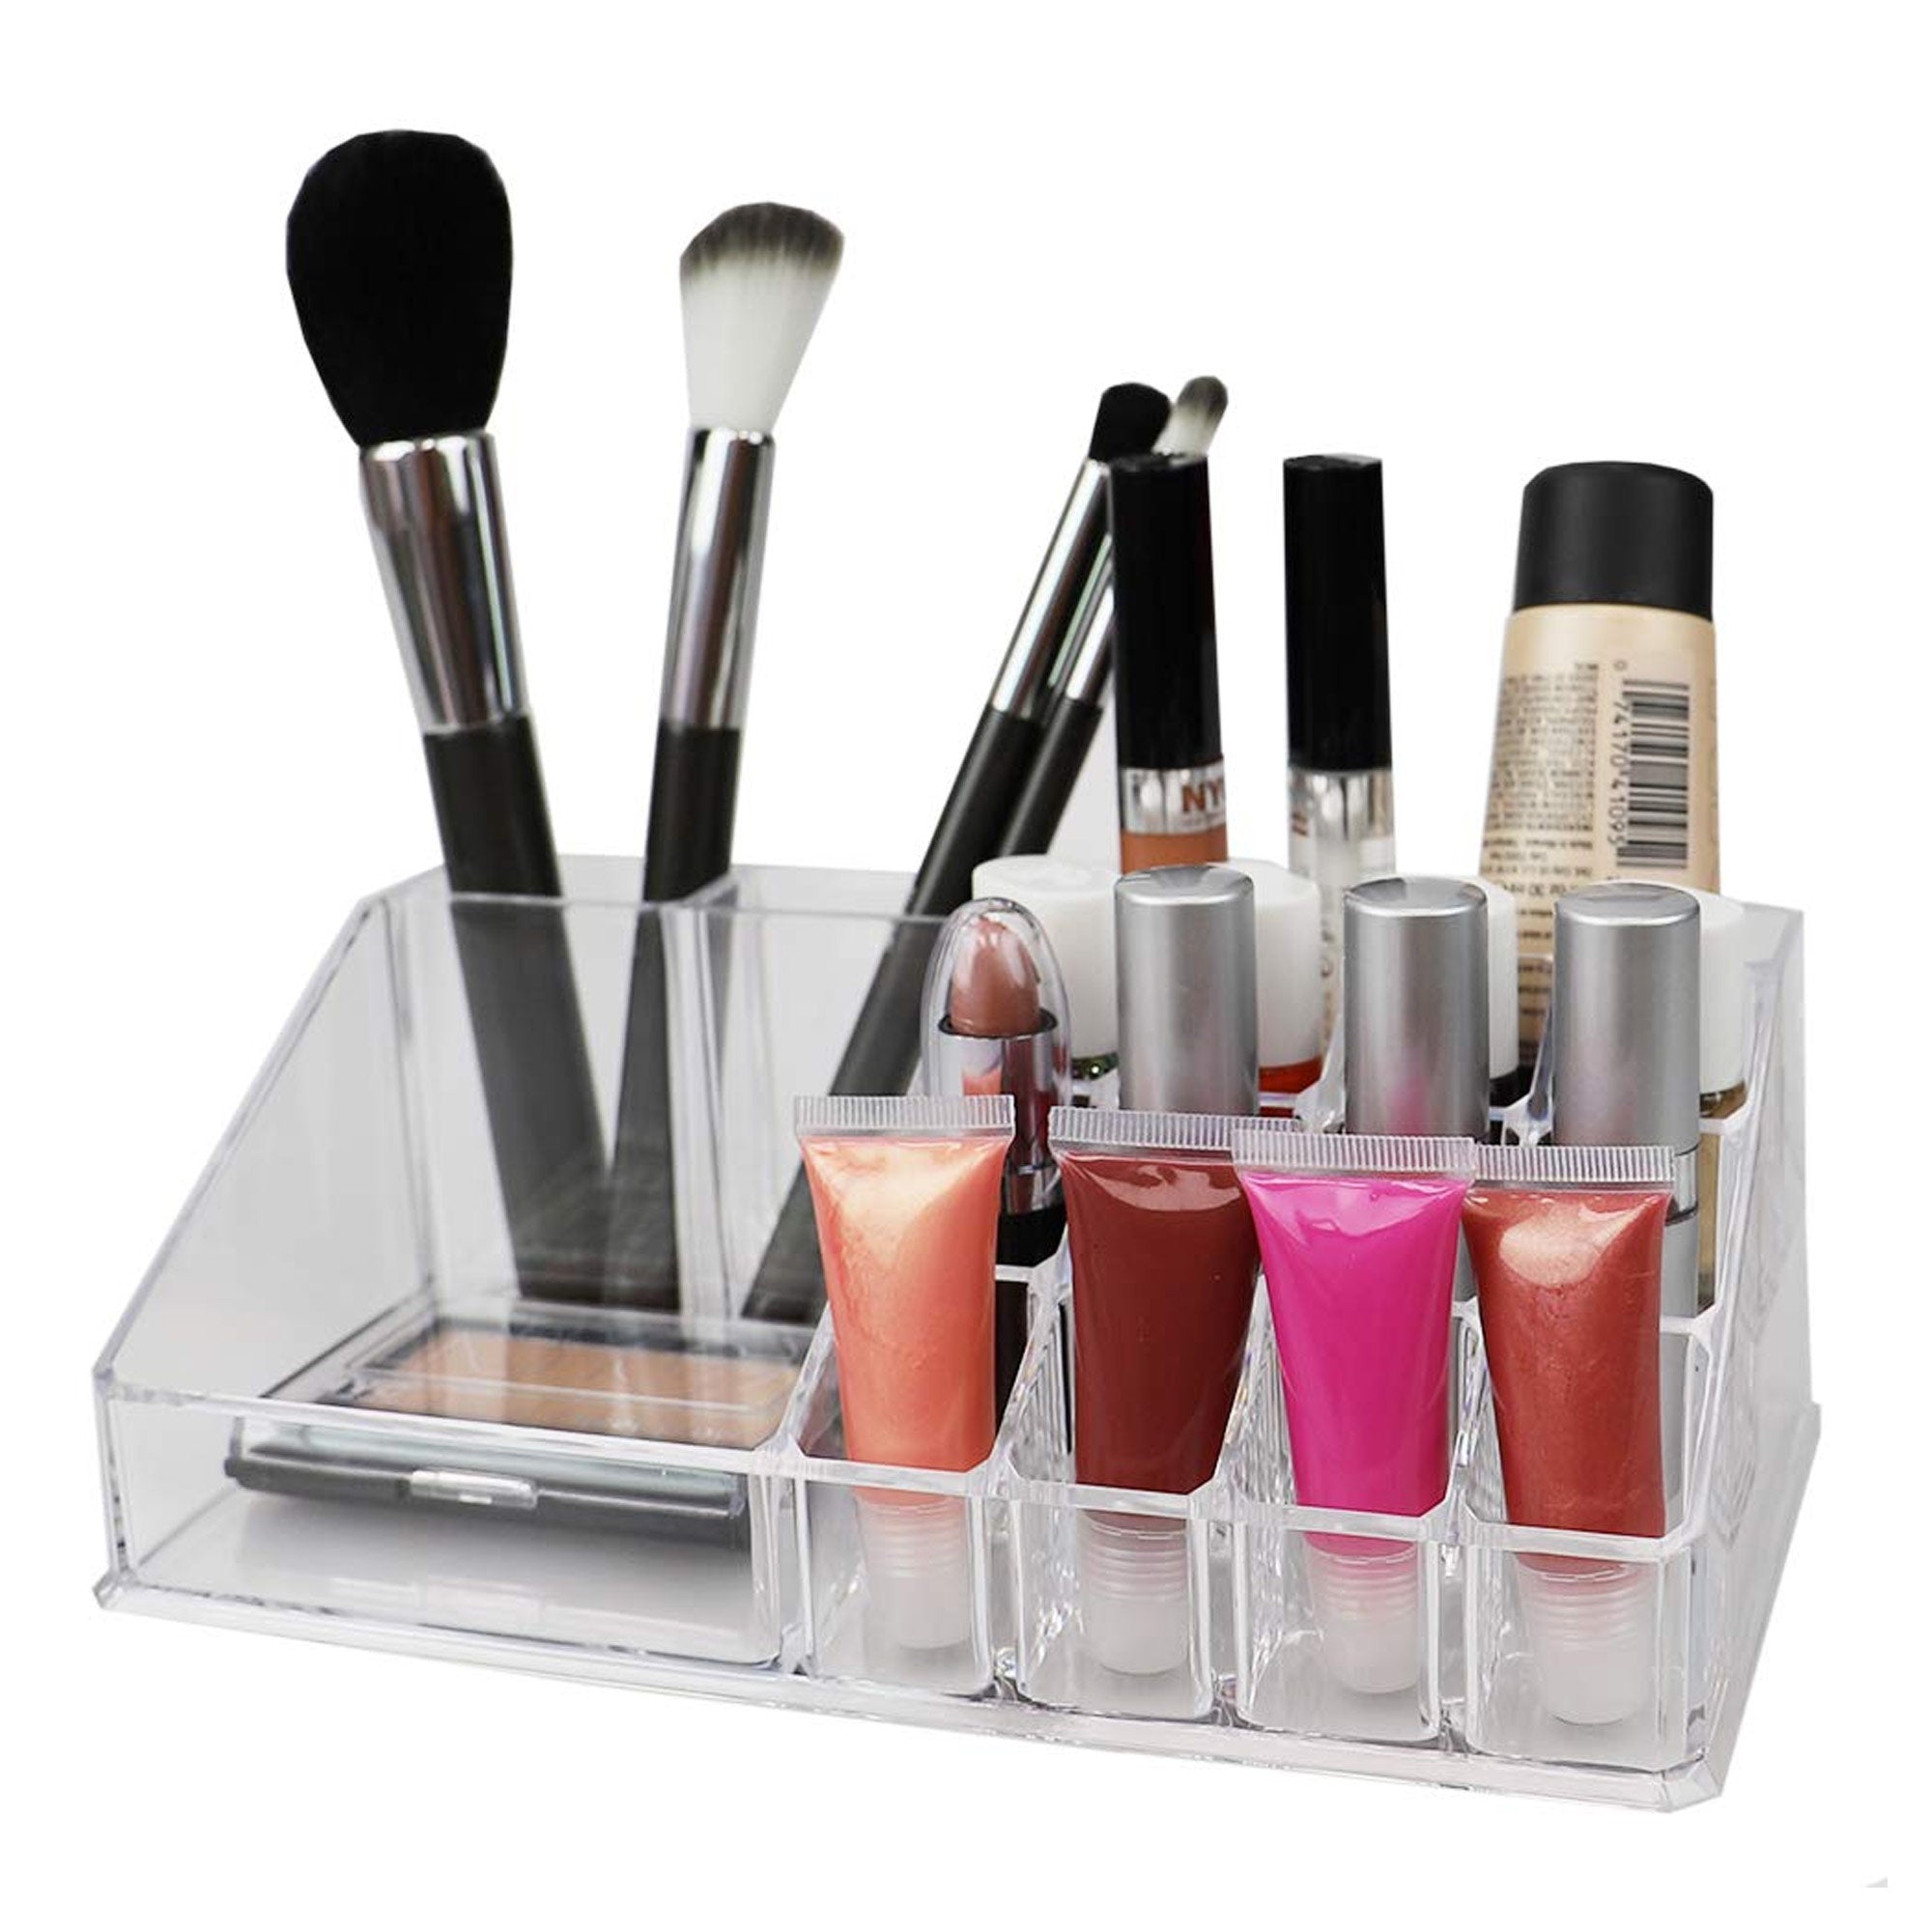 Home Basics 3 Tier Make-Up Cosmetic Organizer, 23 Compartments, Clear, 9.5x5.5x7.5 Inches